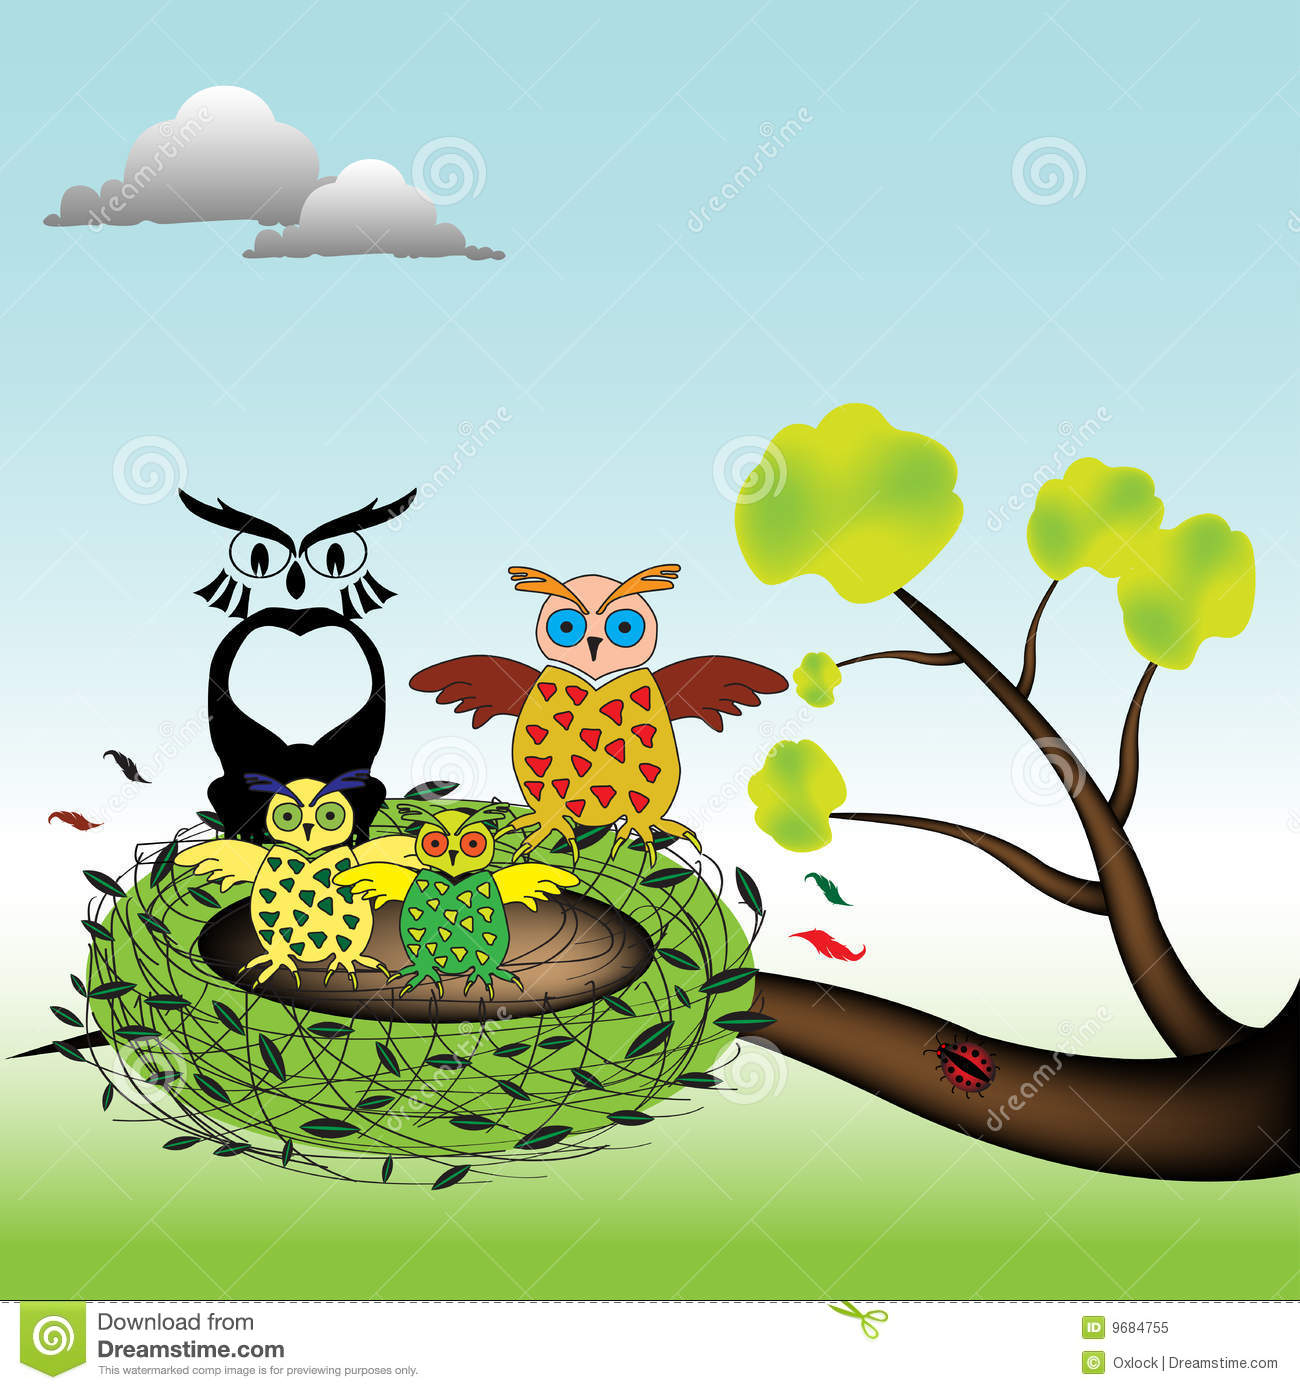 Colorful Illustration With Clouds And An Owl Family In A Nest